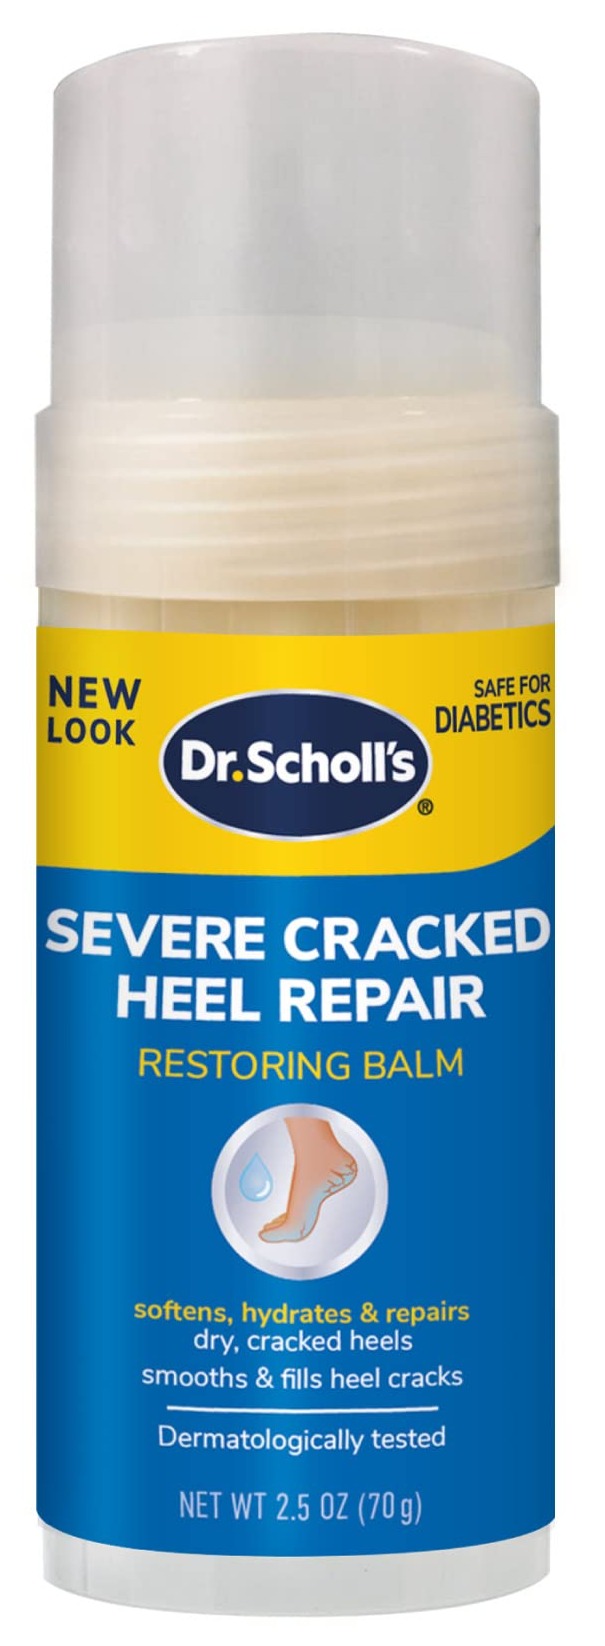 2.5-Oz Dr. Scholl's Severe Cracked Heel Repair Balm $4.55 w/ S&S + Free Shipping w/ Prime or on $25+